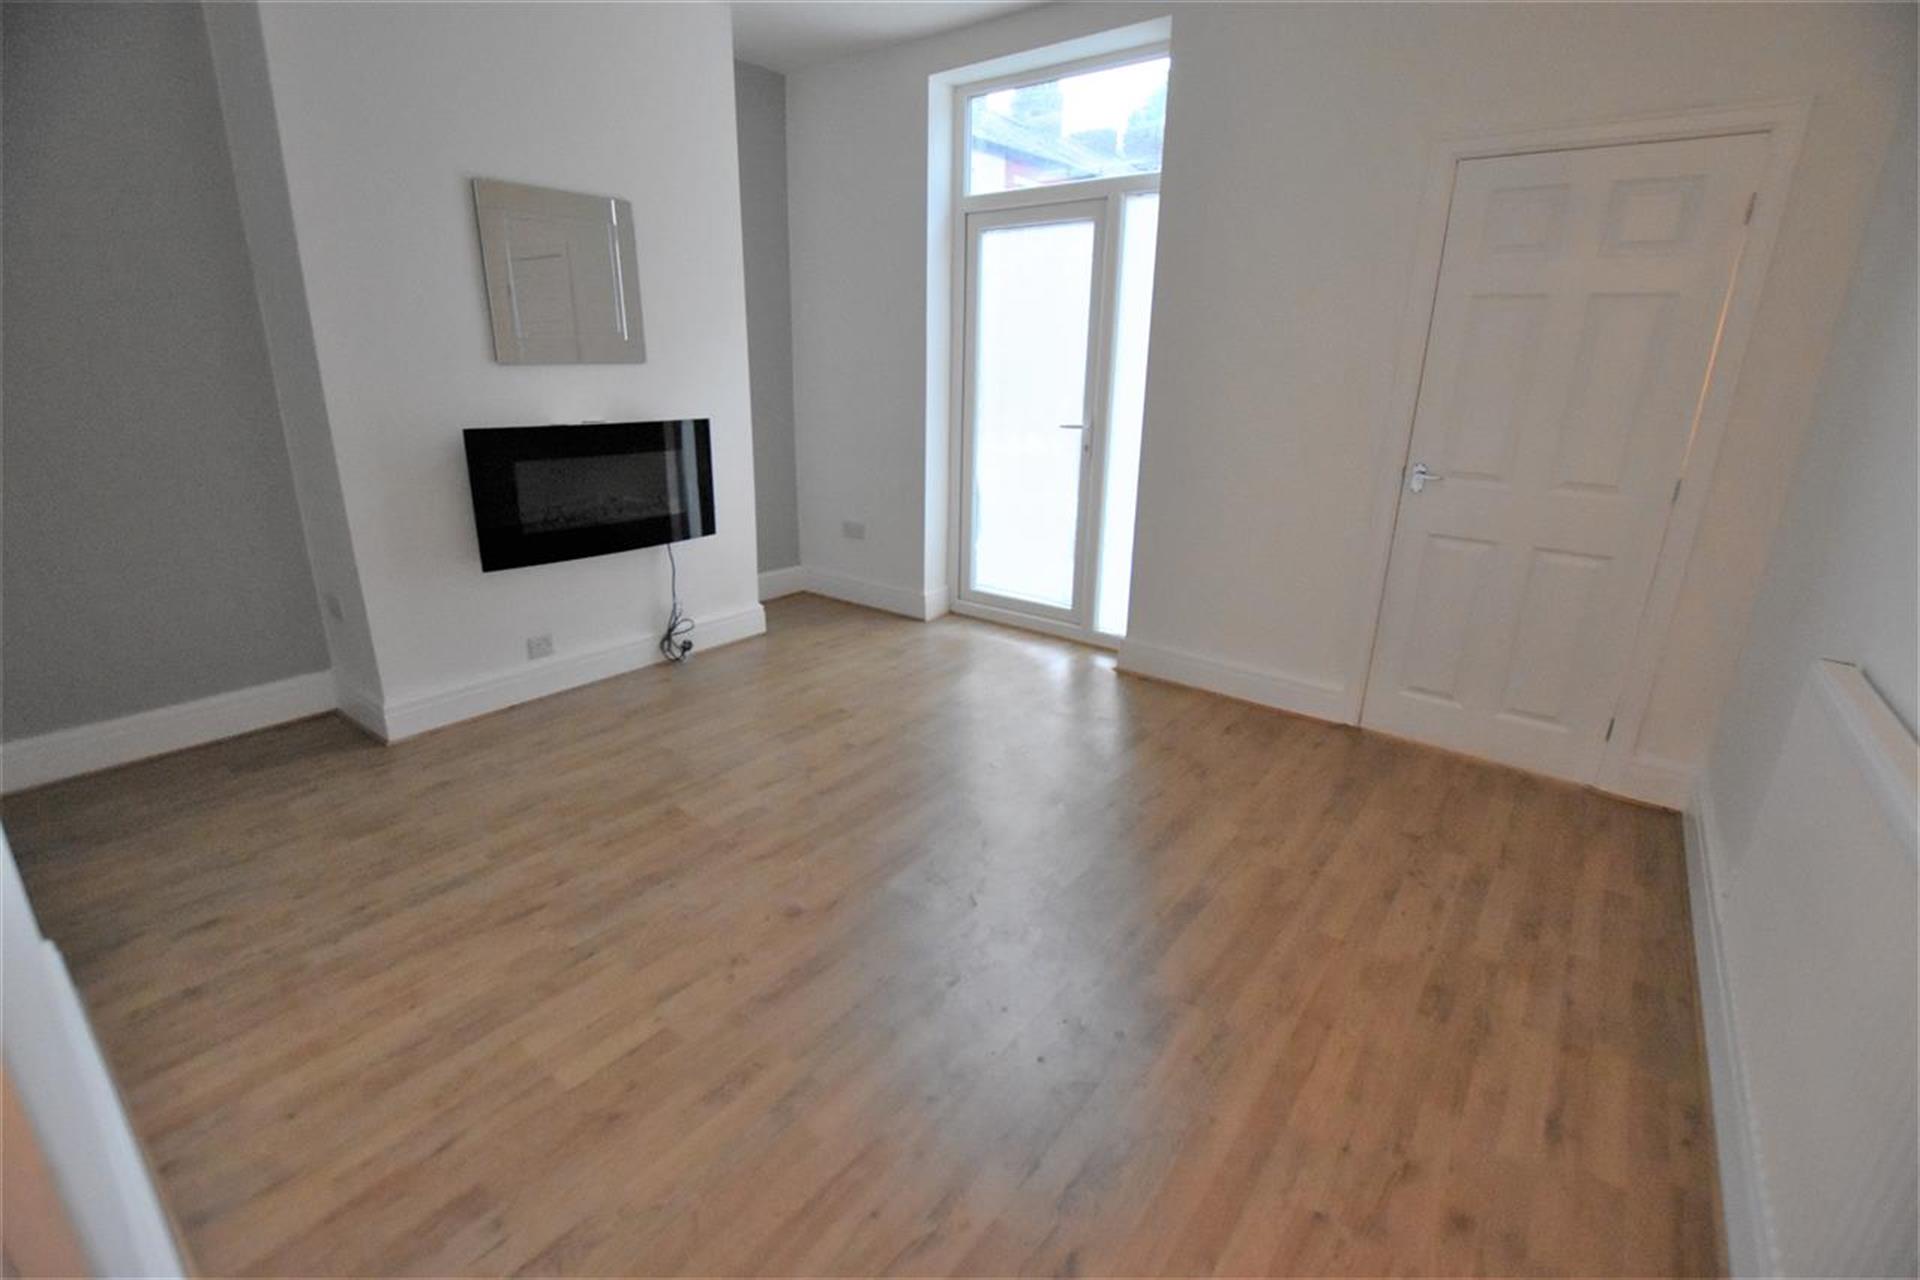 2 Bedroom Terraced House To Rent - Reception Room 2